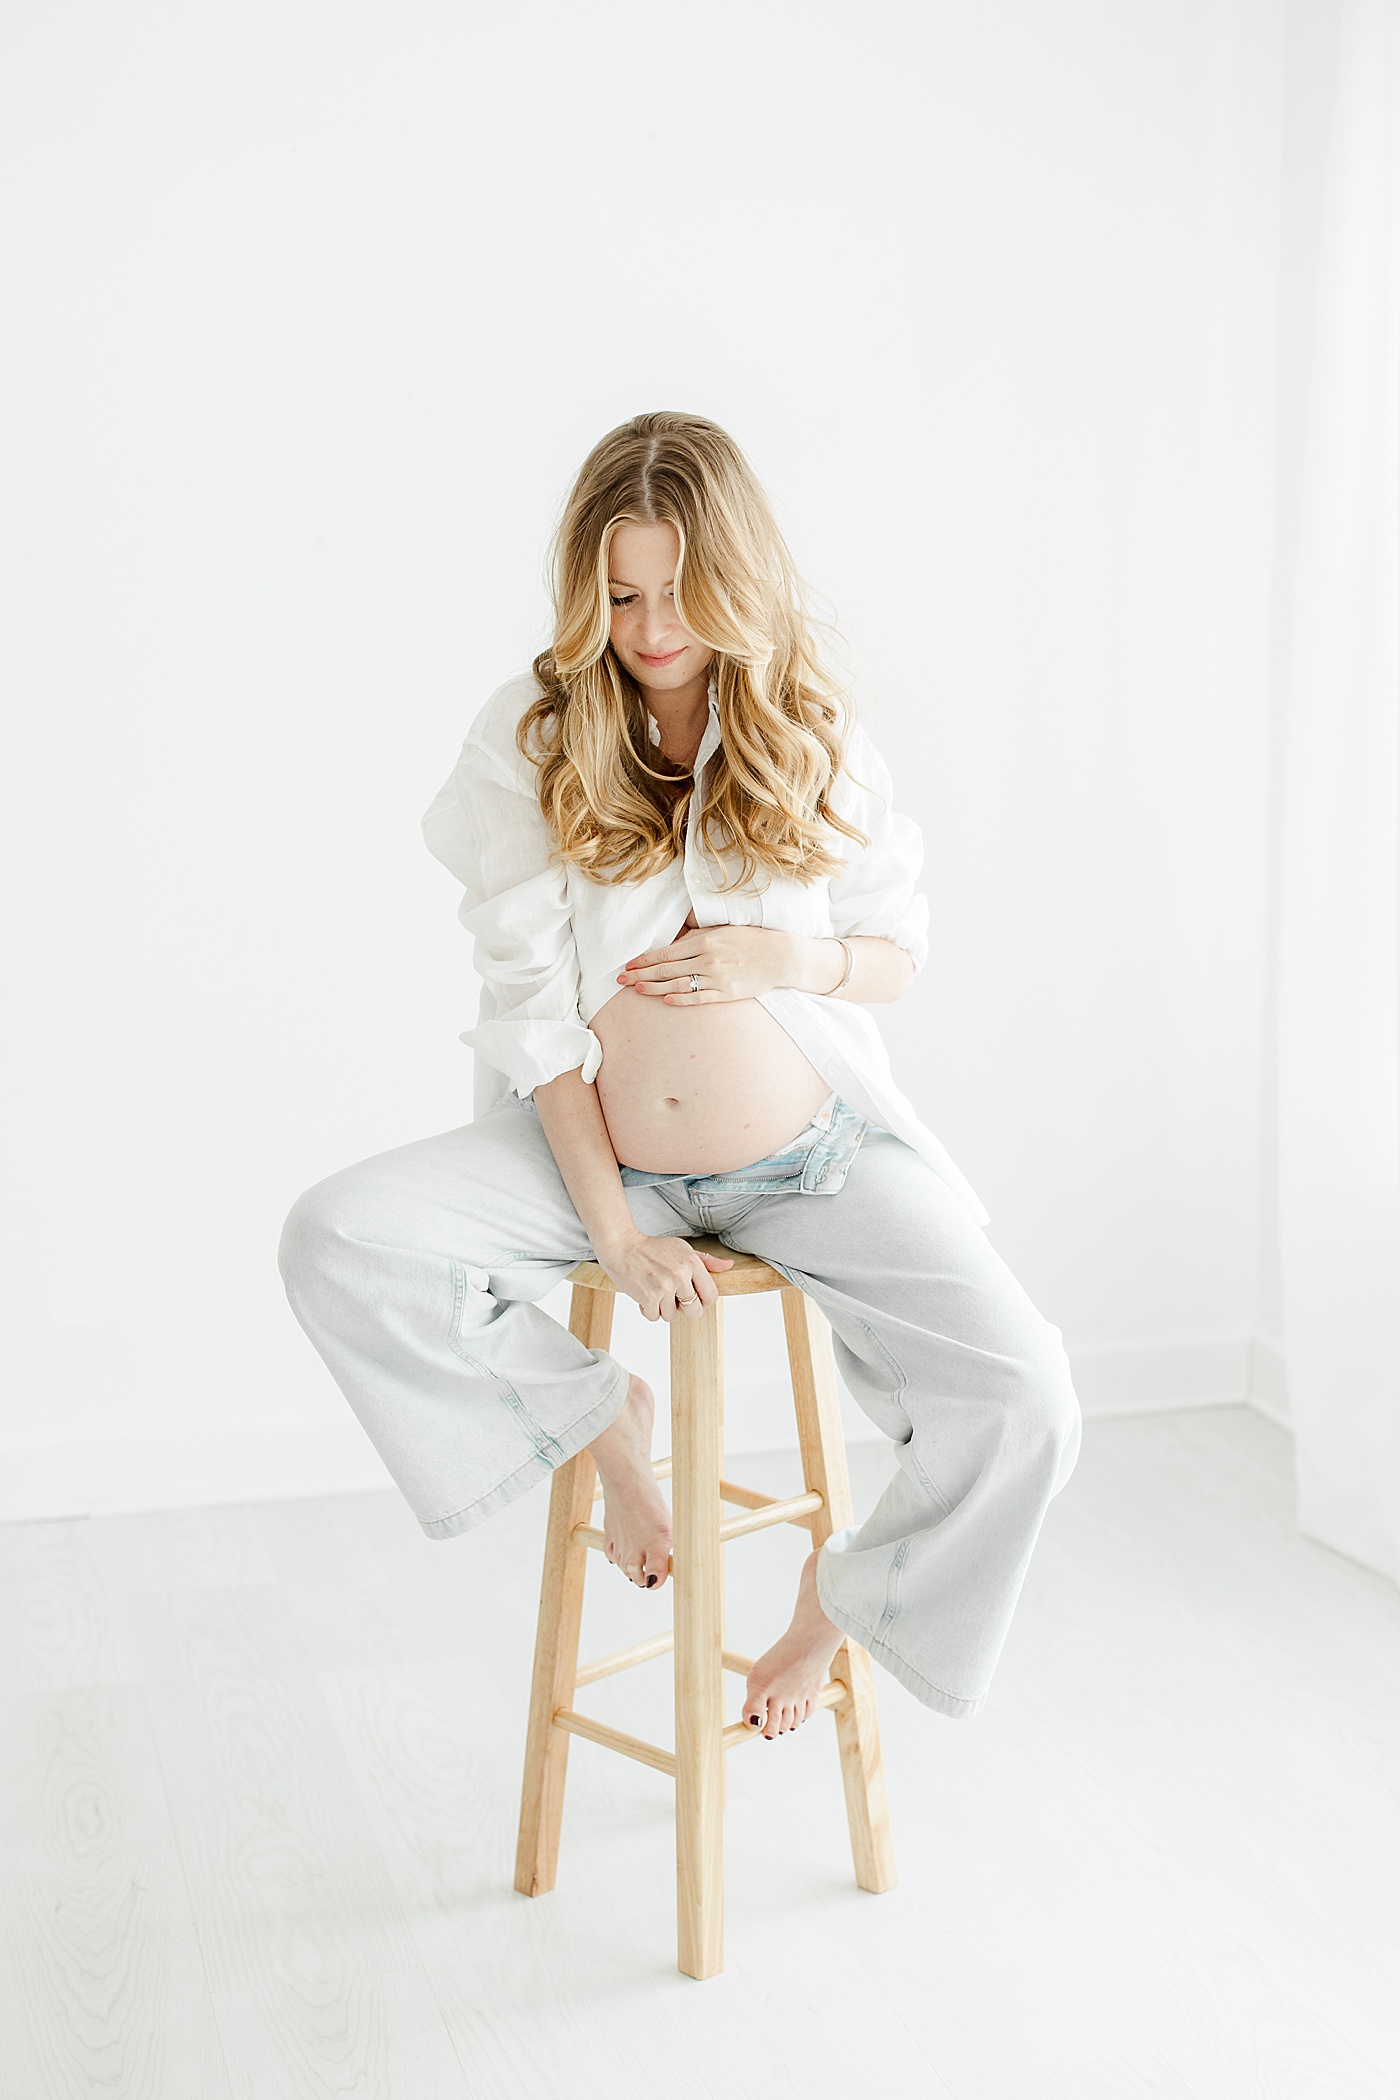 What To Wear for Your Maternity Session | Expecting mom sitting on stool wearing denim and a white button-up shirt showing pregnant belly | Kristin Wood Photography